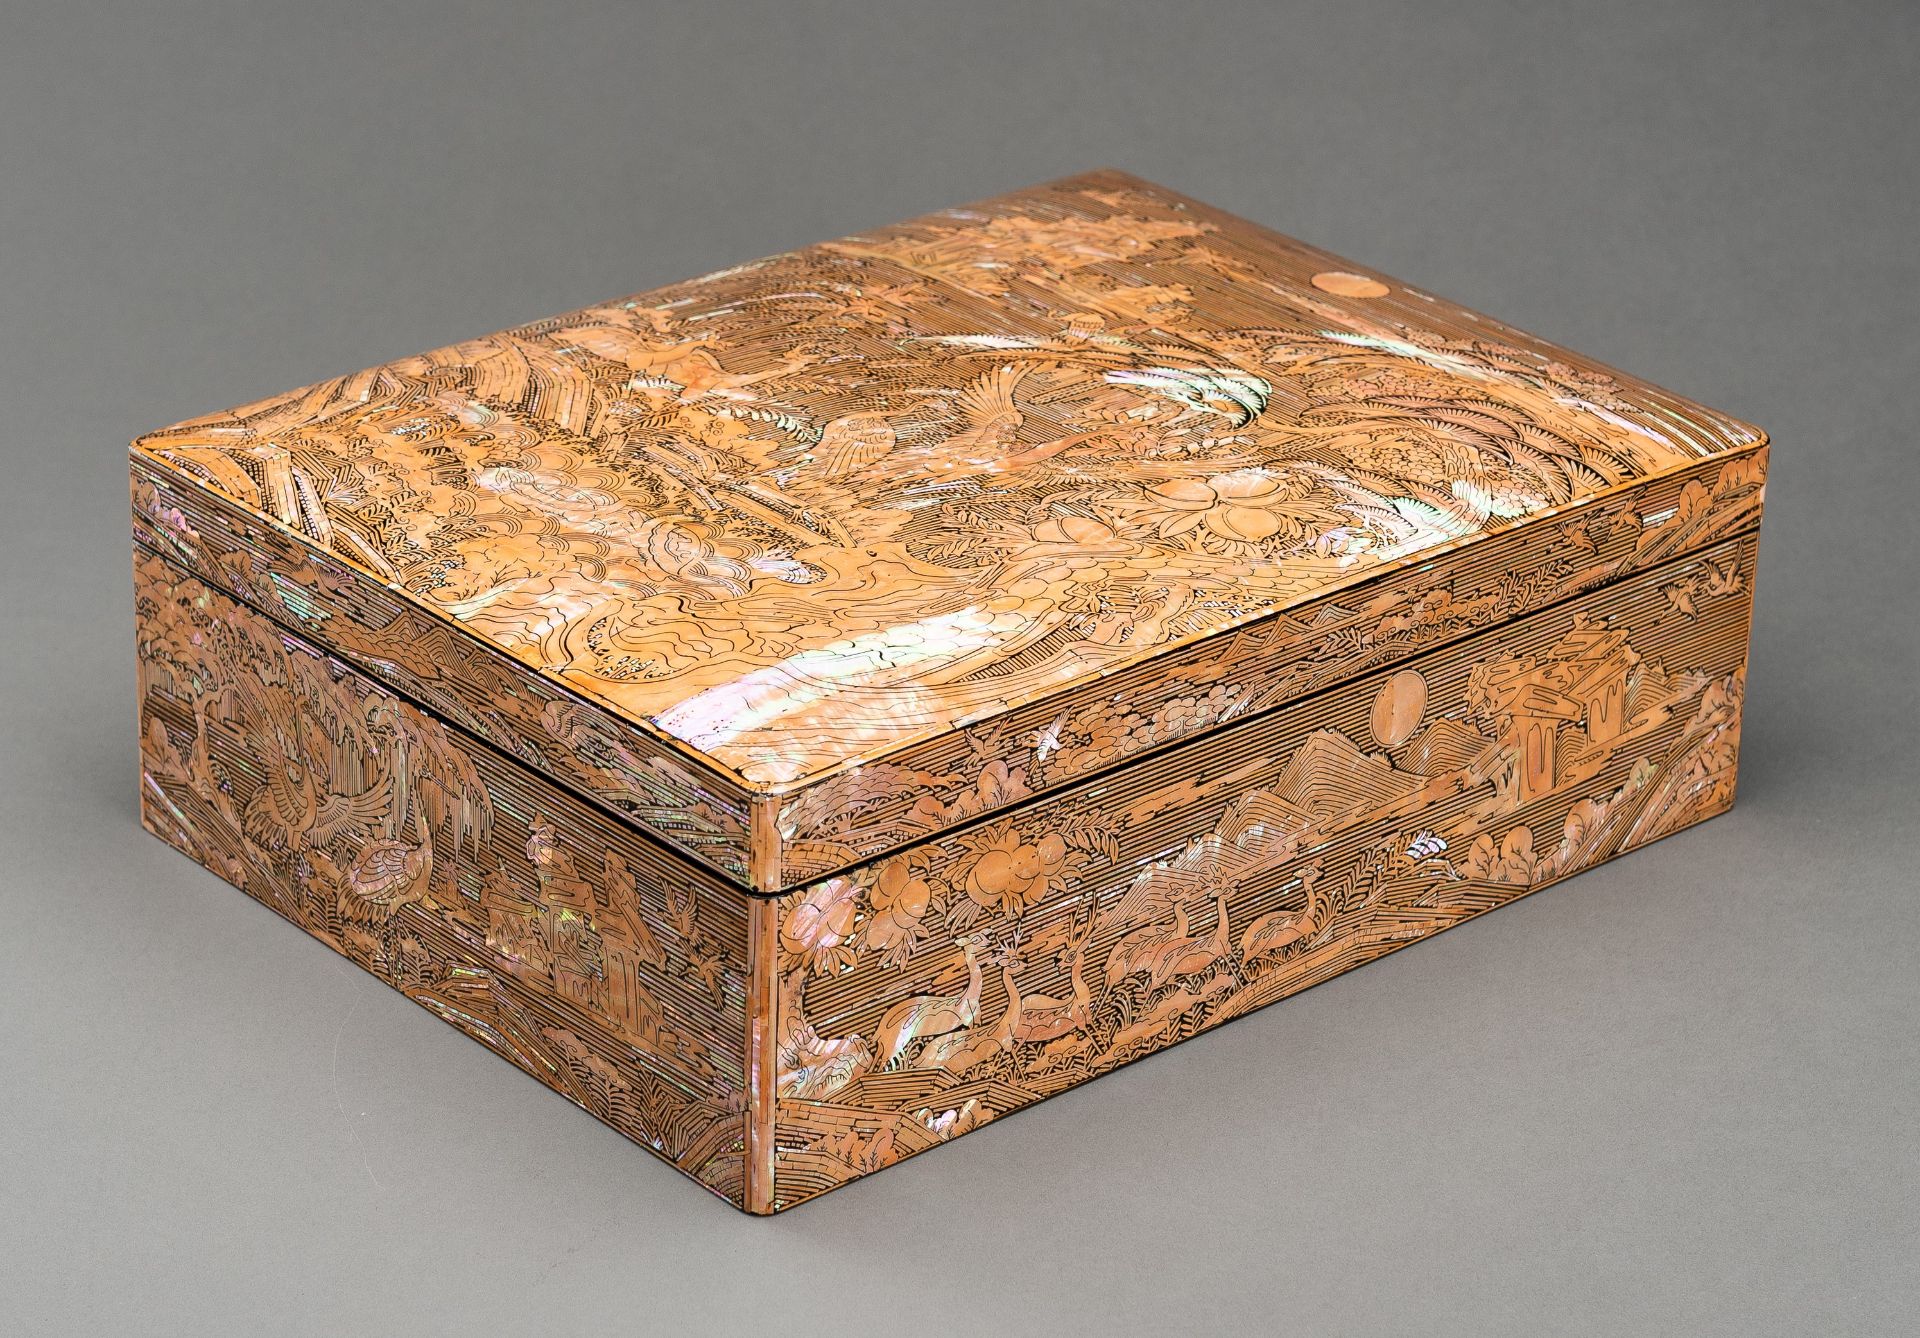 A MOTHER-OF-PEARL INLAID WOOD BOX AND COVER